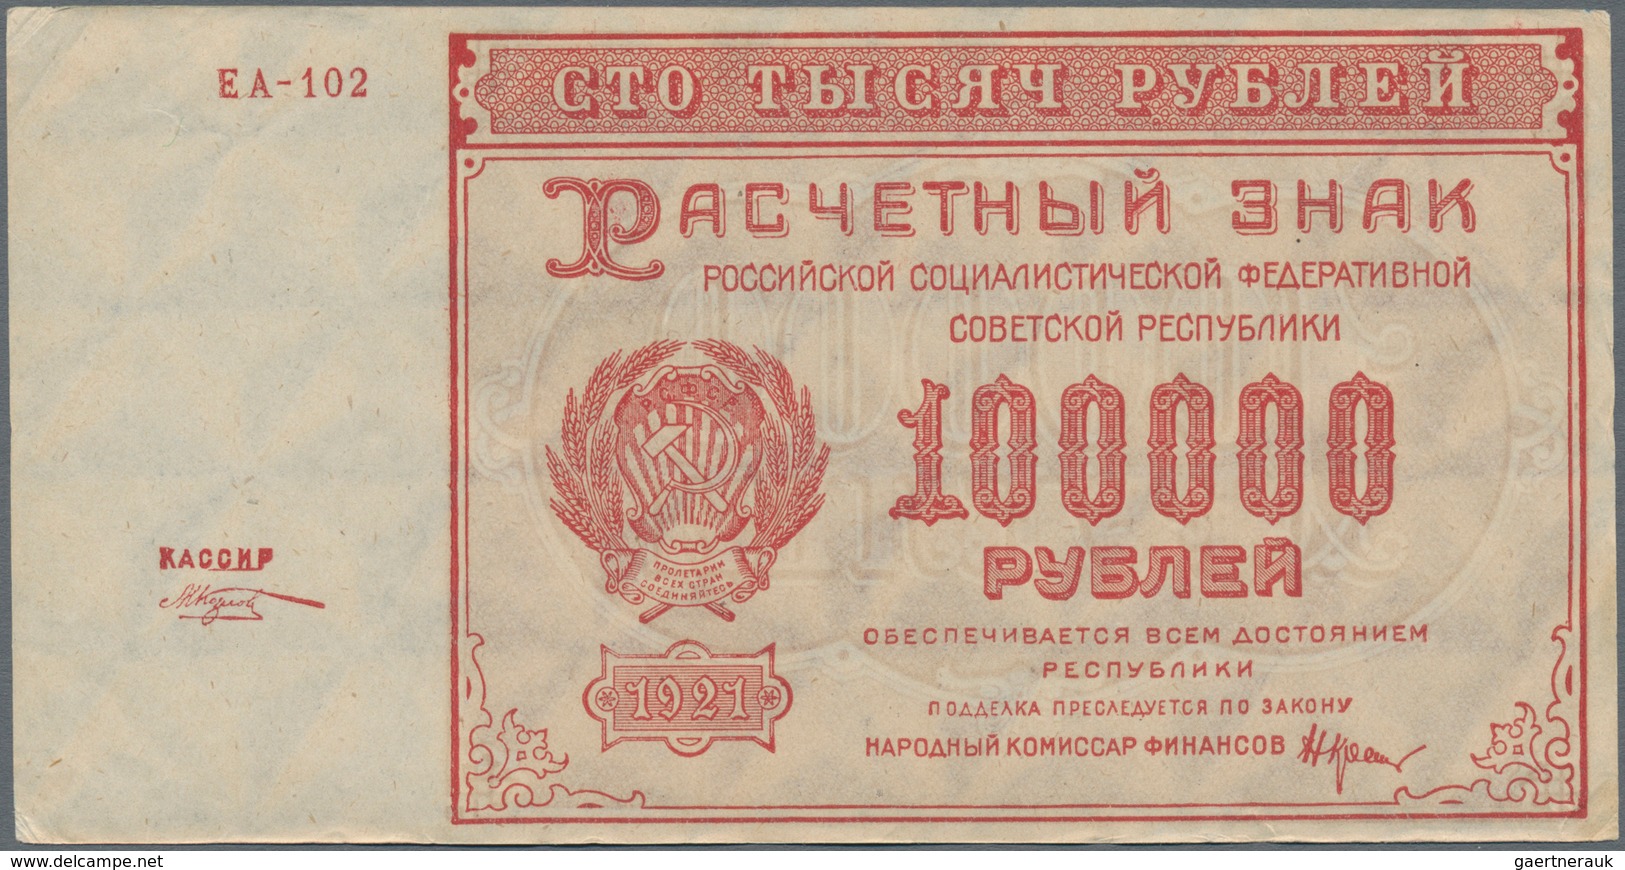 Russia / Russland: Set with 10 banknotes 100.000 Rubles 1921 State Treasury, P.117 in about VF to VF